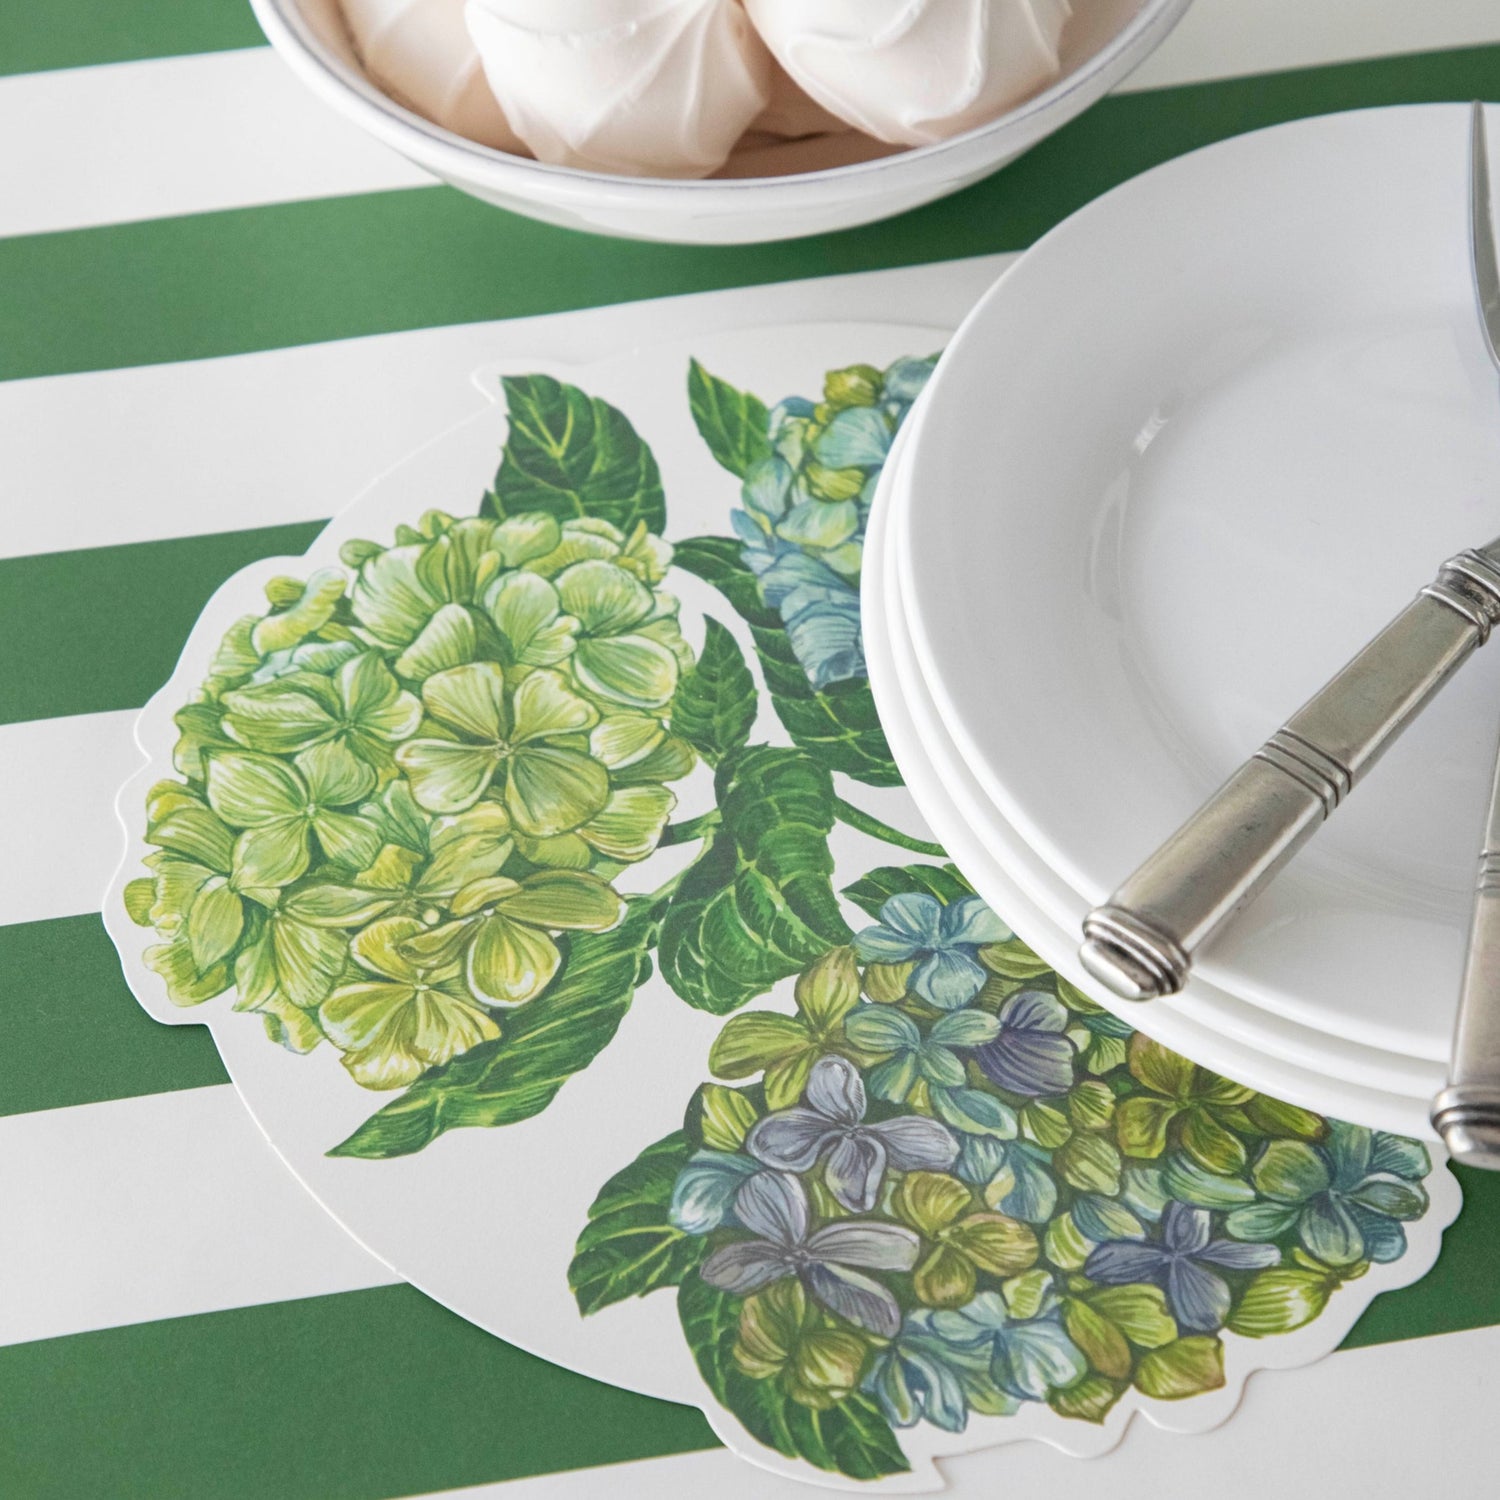 These beautifully designed Hydrangea Serving Papers by Hester &amp; Cook are the perfect addition to your dining table. Their vibrant colors and intricate patterns make them a standout piece for any occasion. Made with high-quality materials.